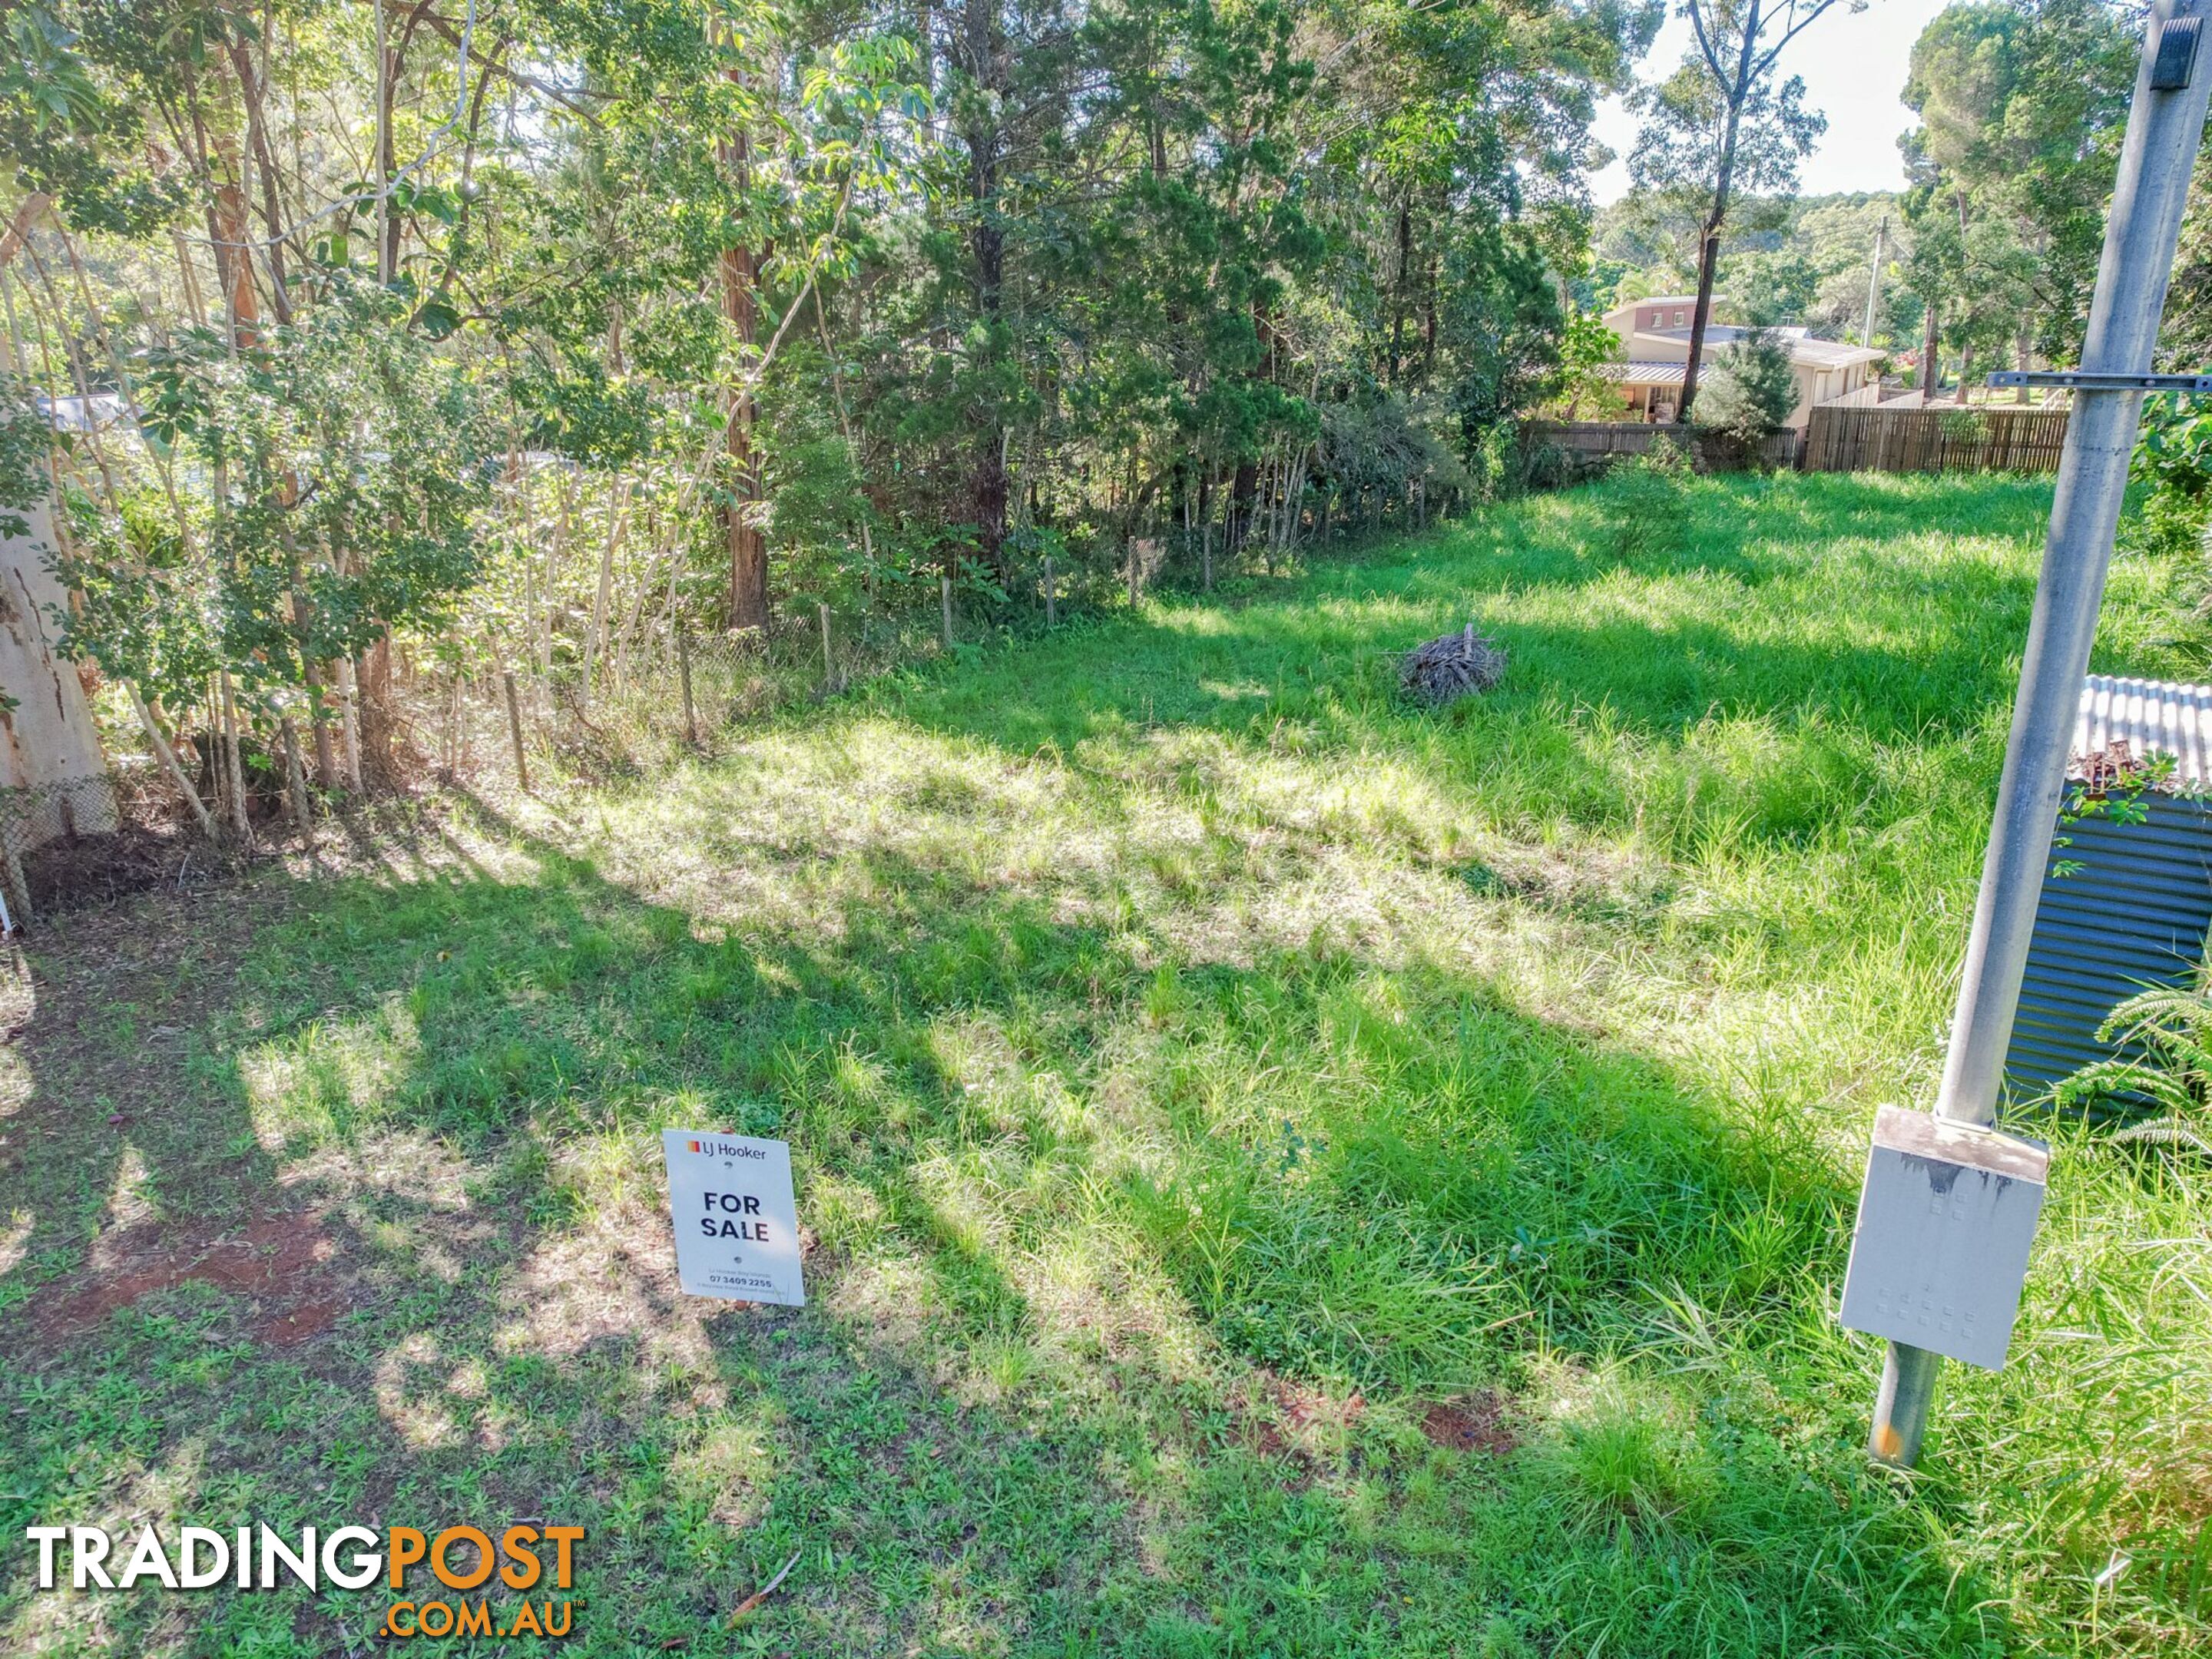 30 Meadstone St RUSSELL ISLAND QLD 4184